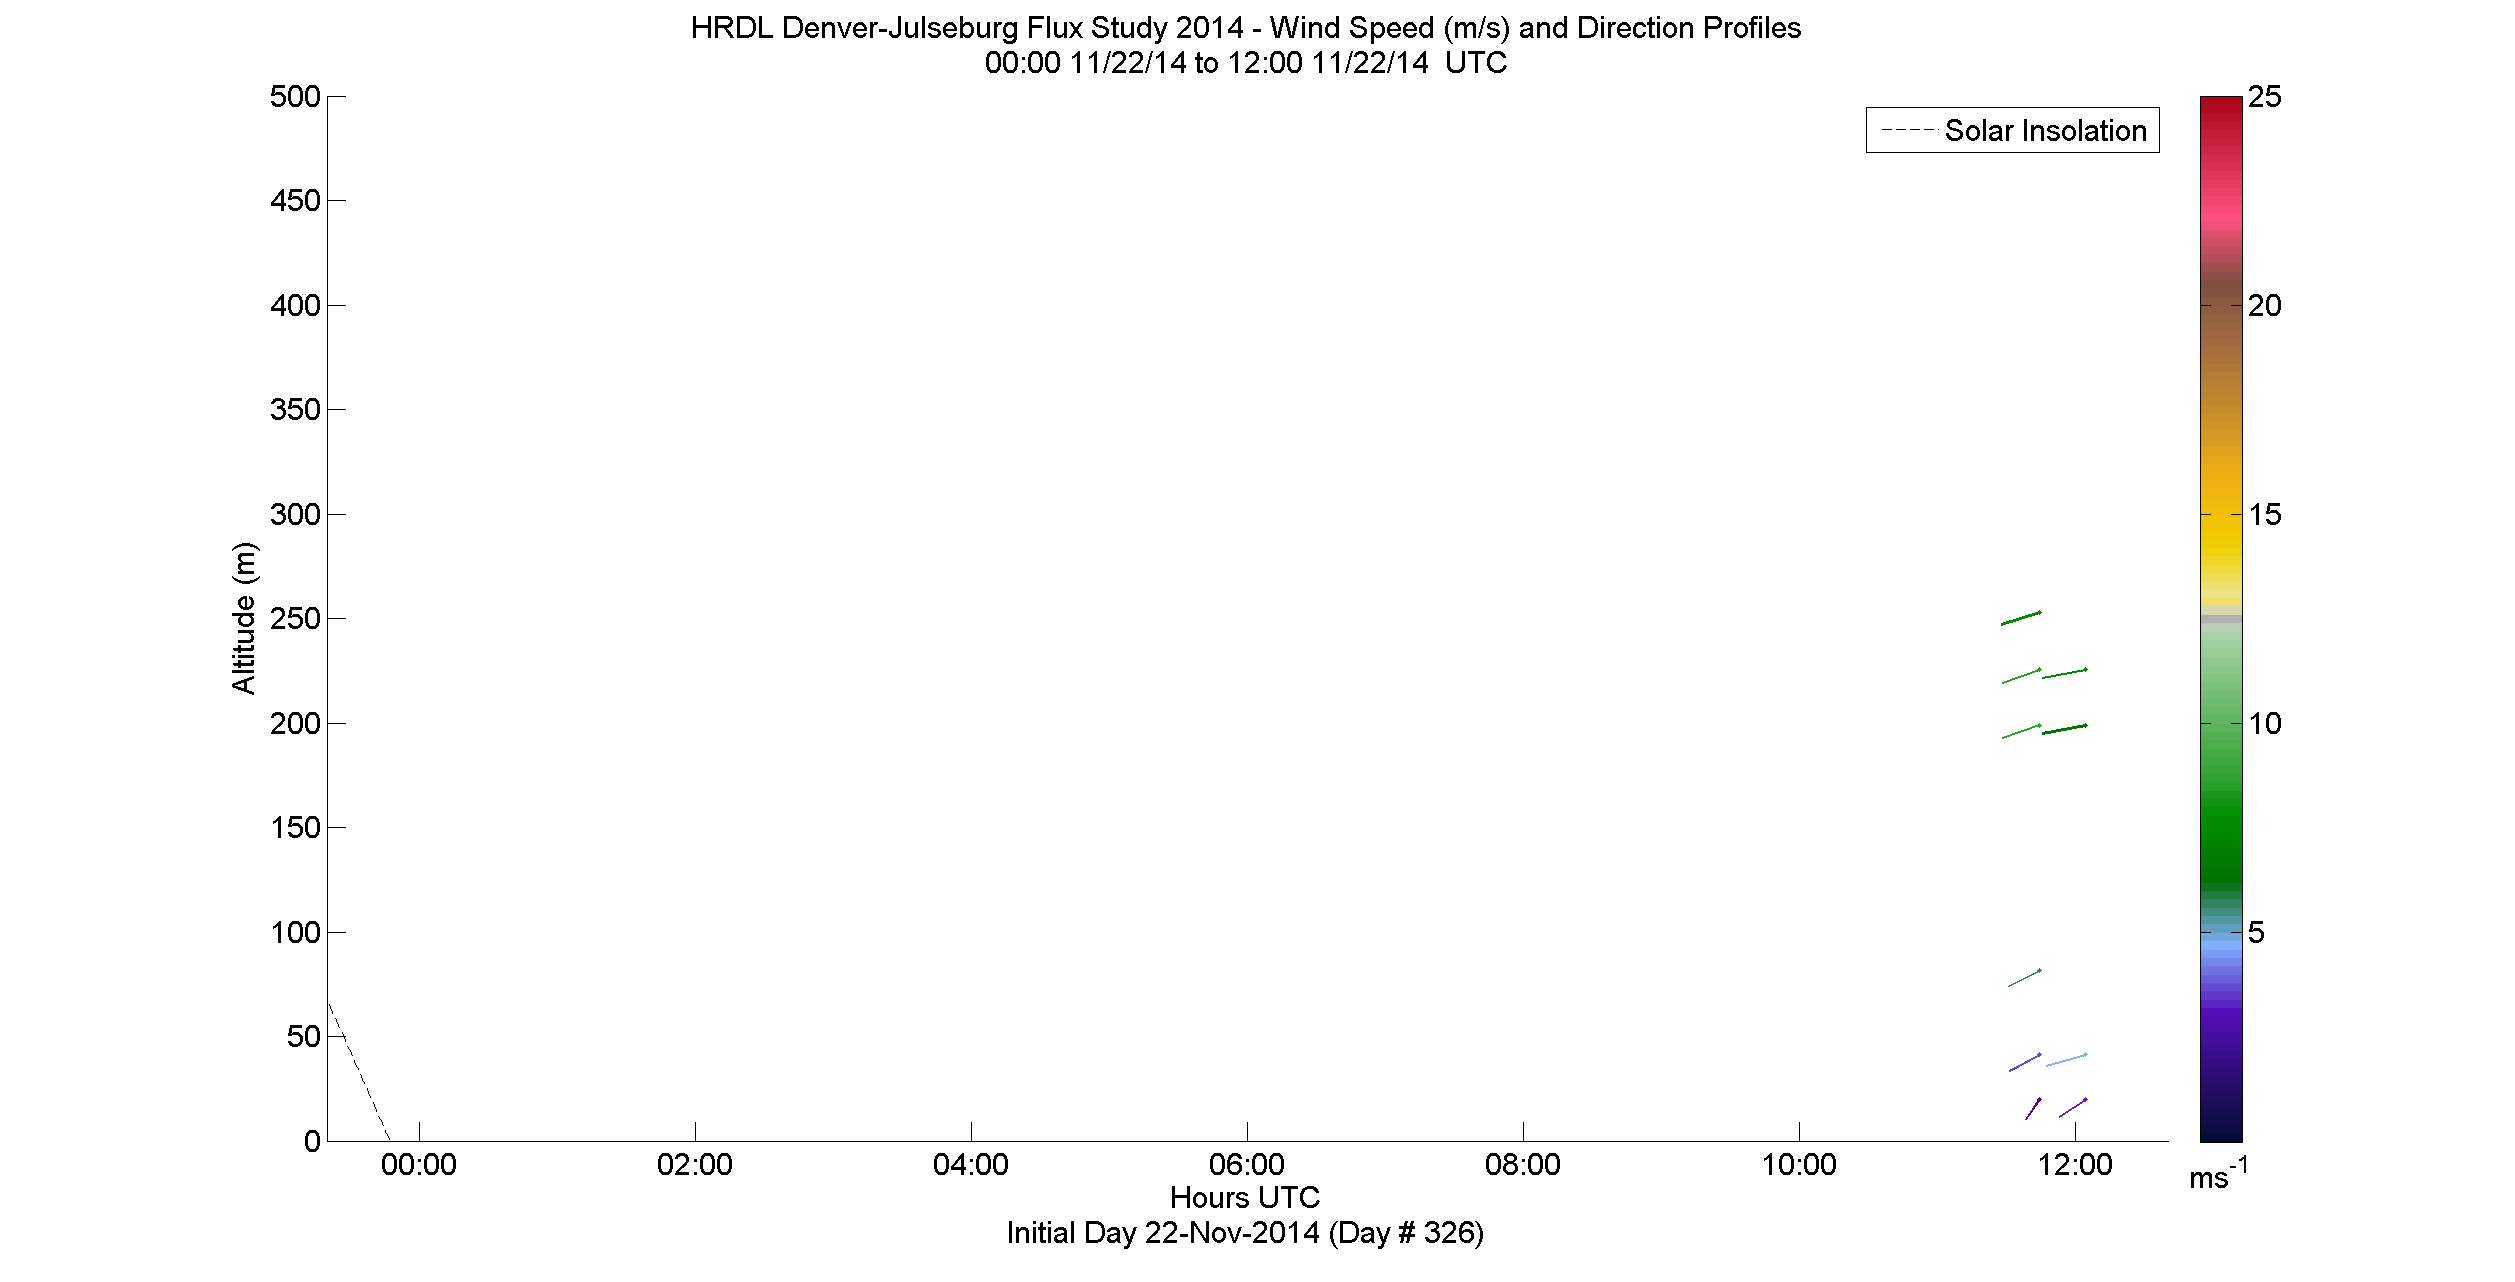 HRDL speed and direction profile - November 22 am